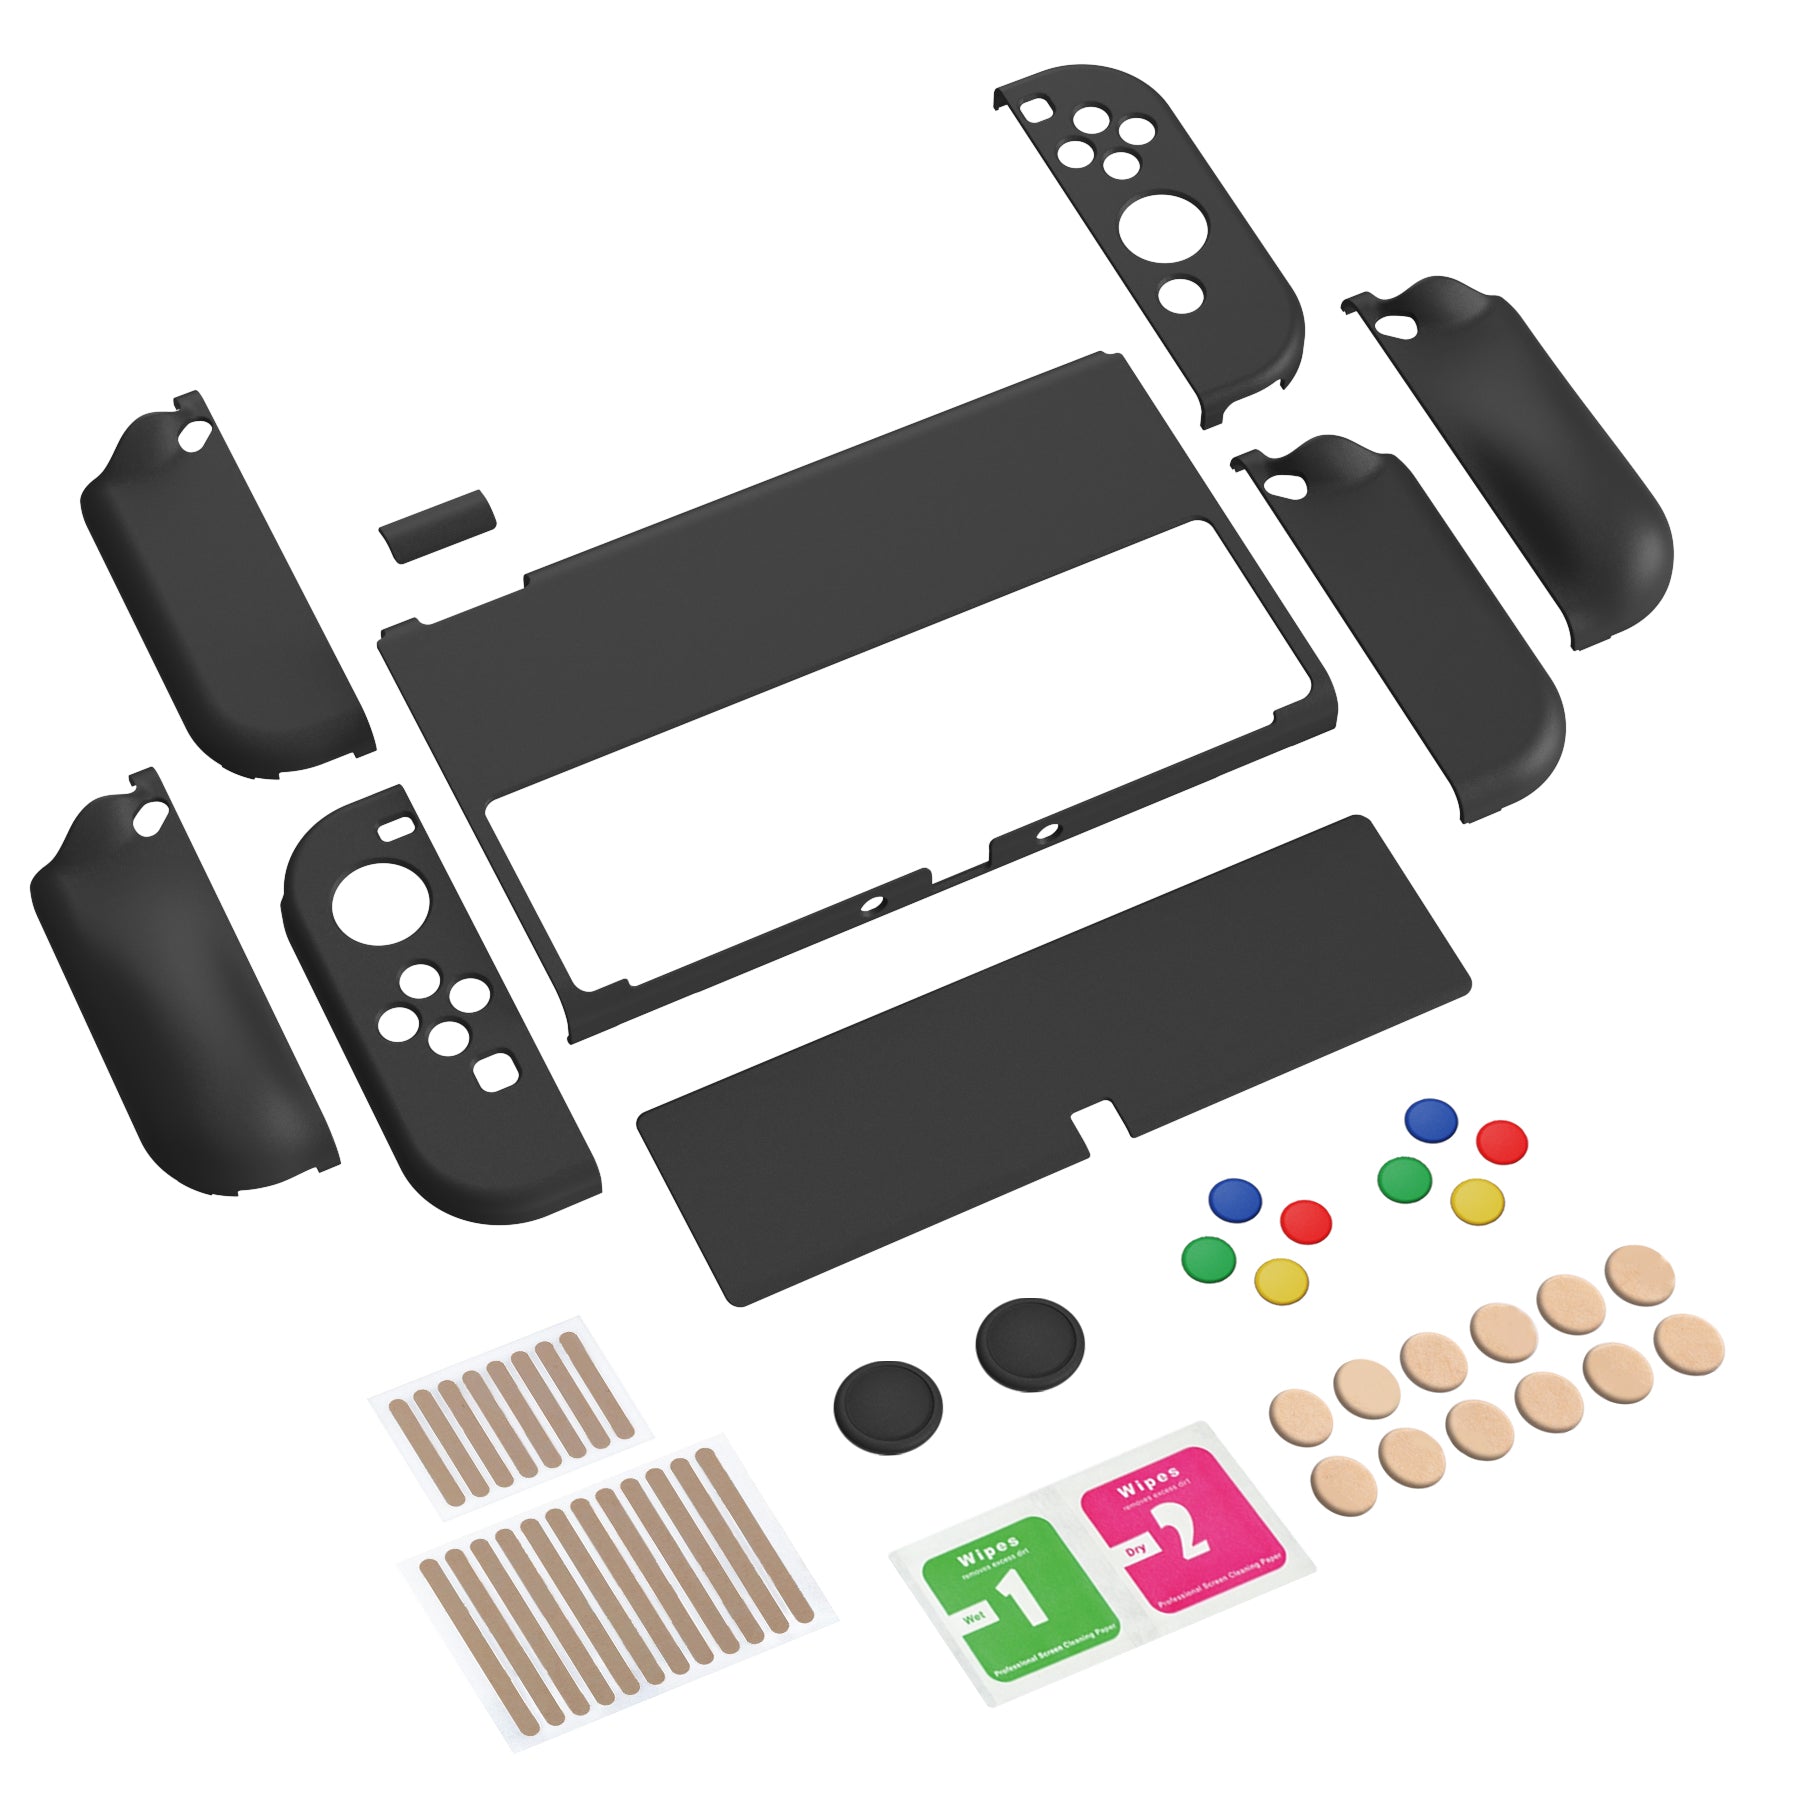 PlayVital AlterGrips Protective Slim Case for Nintendo Switch OLED, Ergonomic Grip Cover for Joycon, Dockable Hard Shell for Switch OLED with Thumb Grip Caps & Button Caps - Black - JSOYP3011 playvital